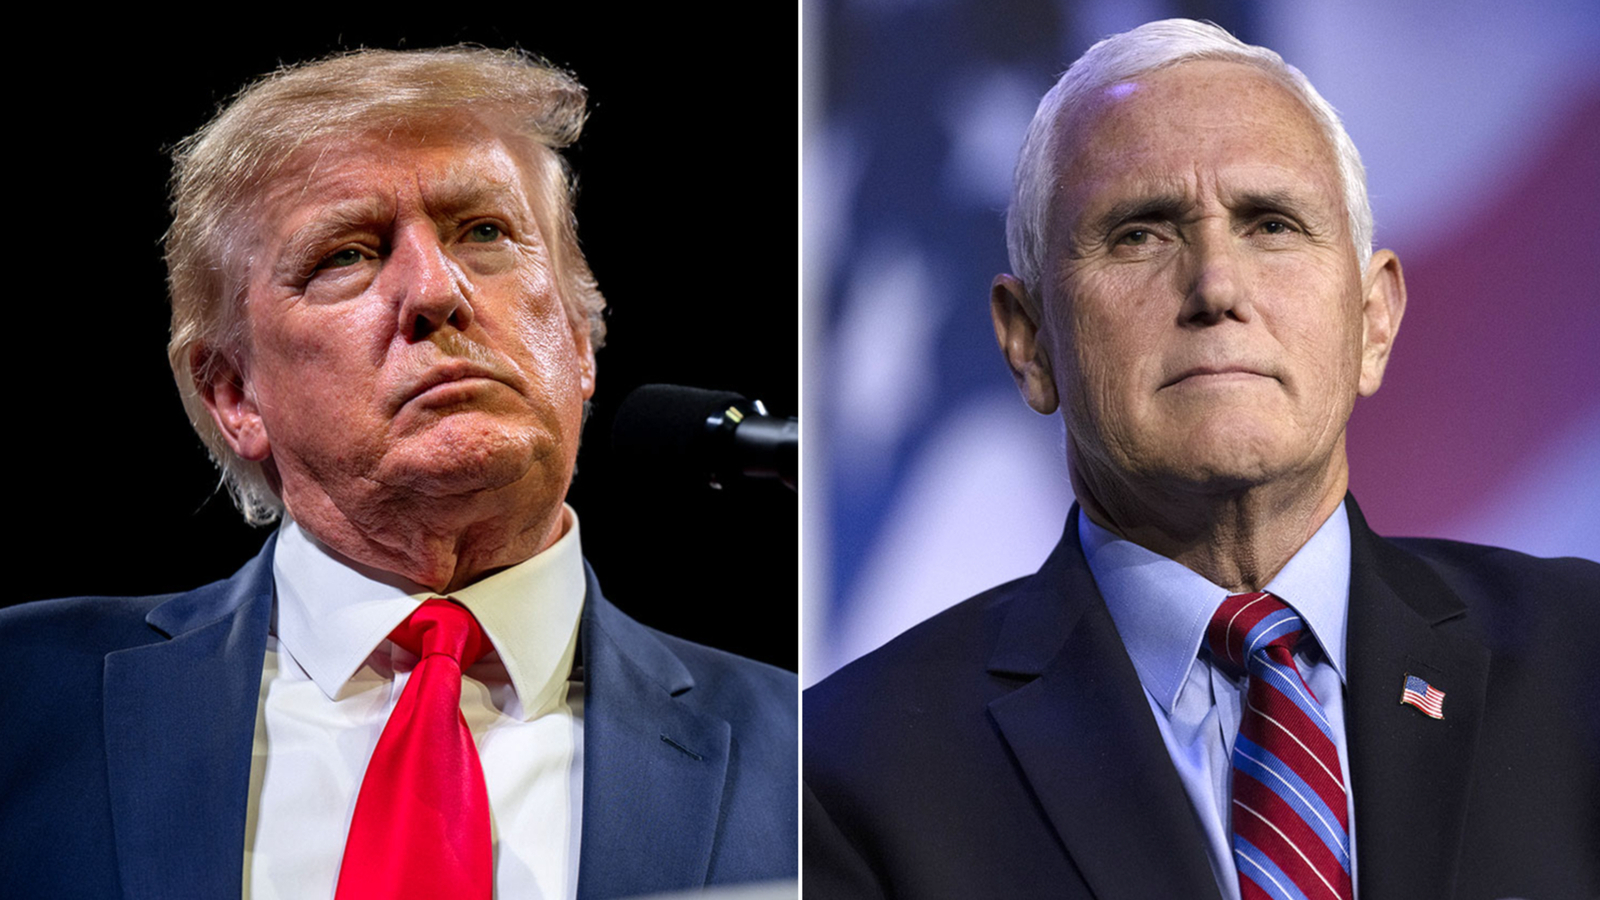 Former vice president Mike Pence won't endorse Donald Trump in 2024